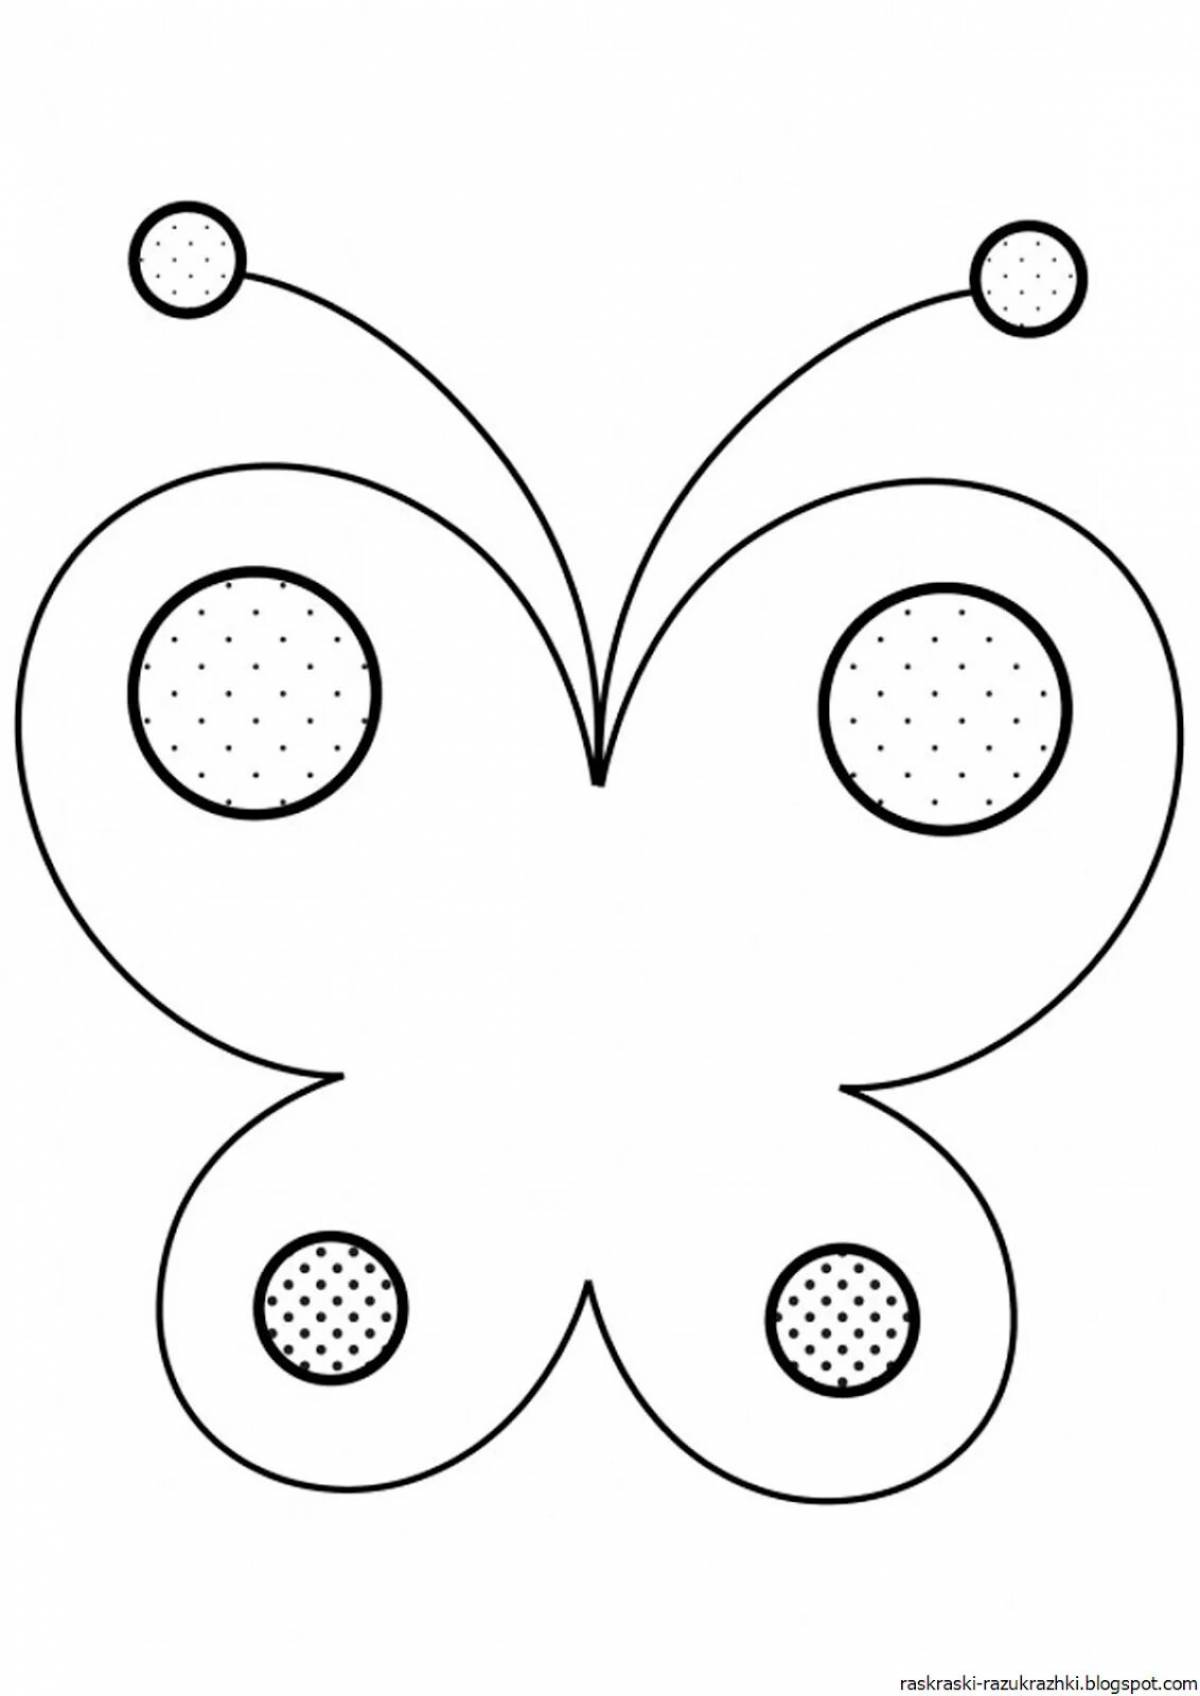 Shining Butterfly Coloring Page